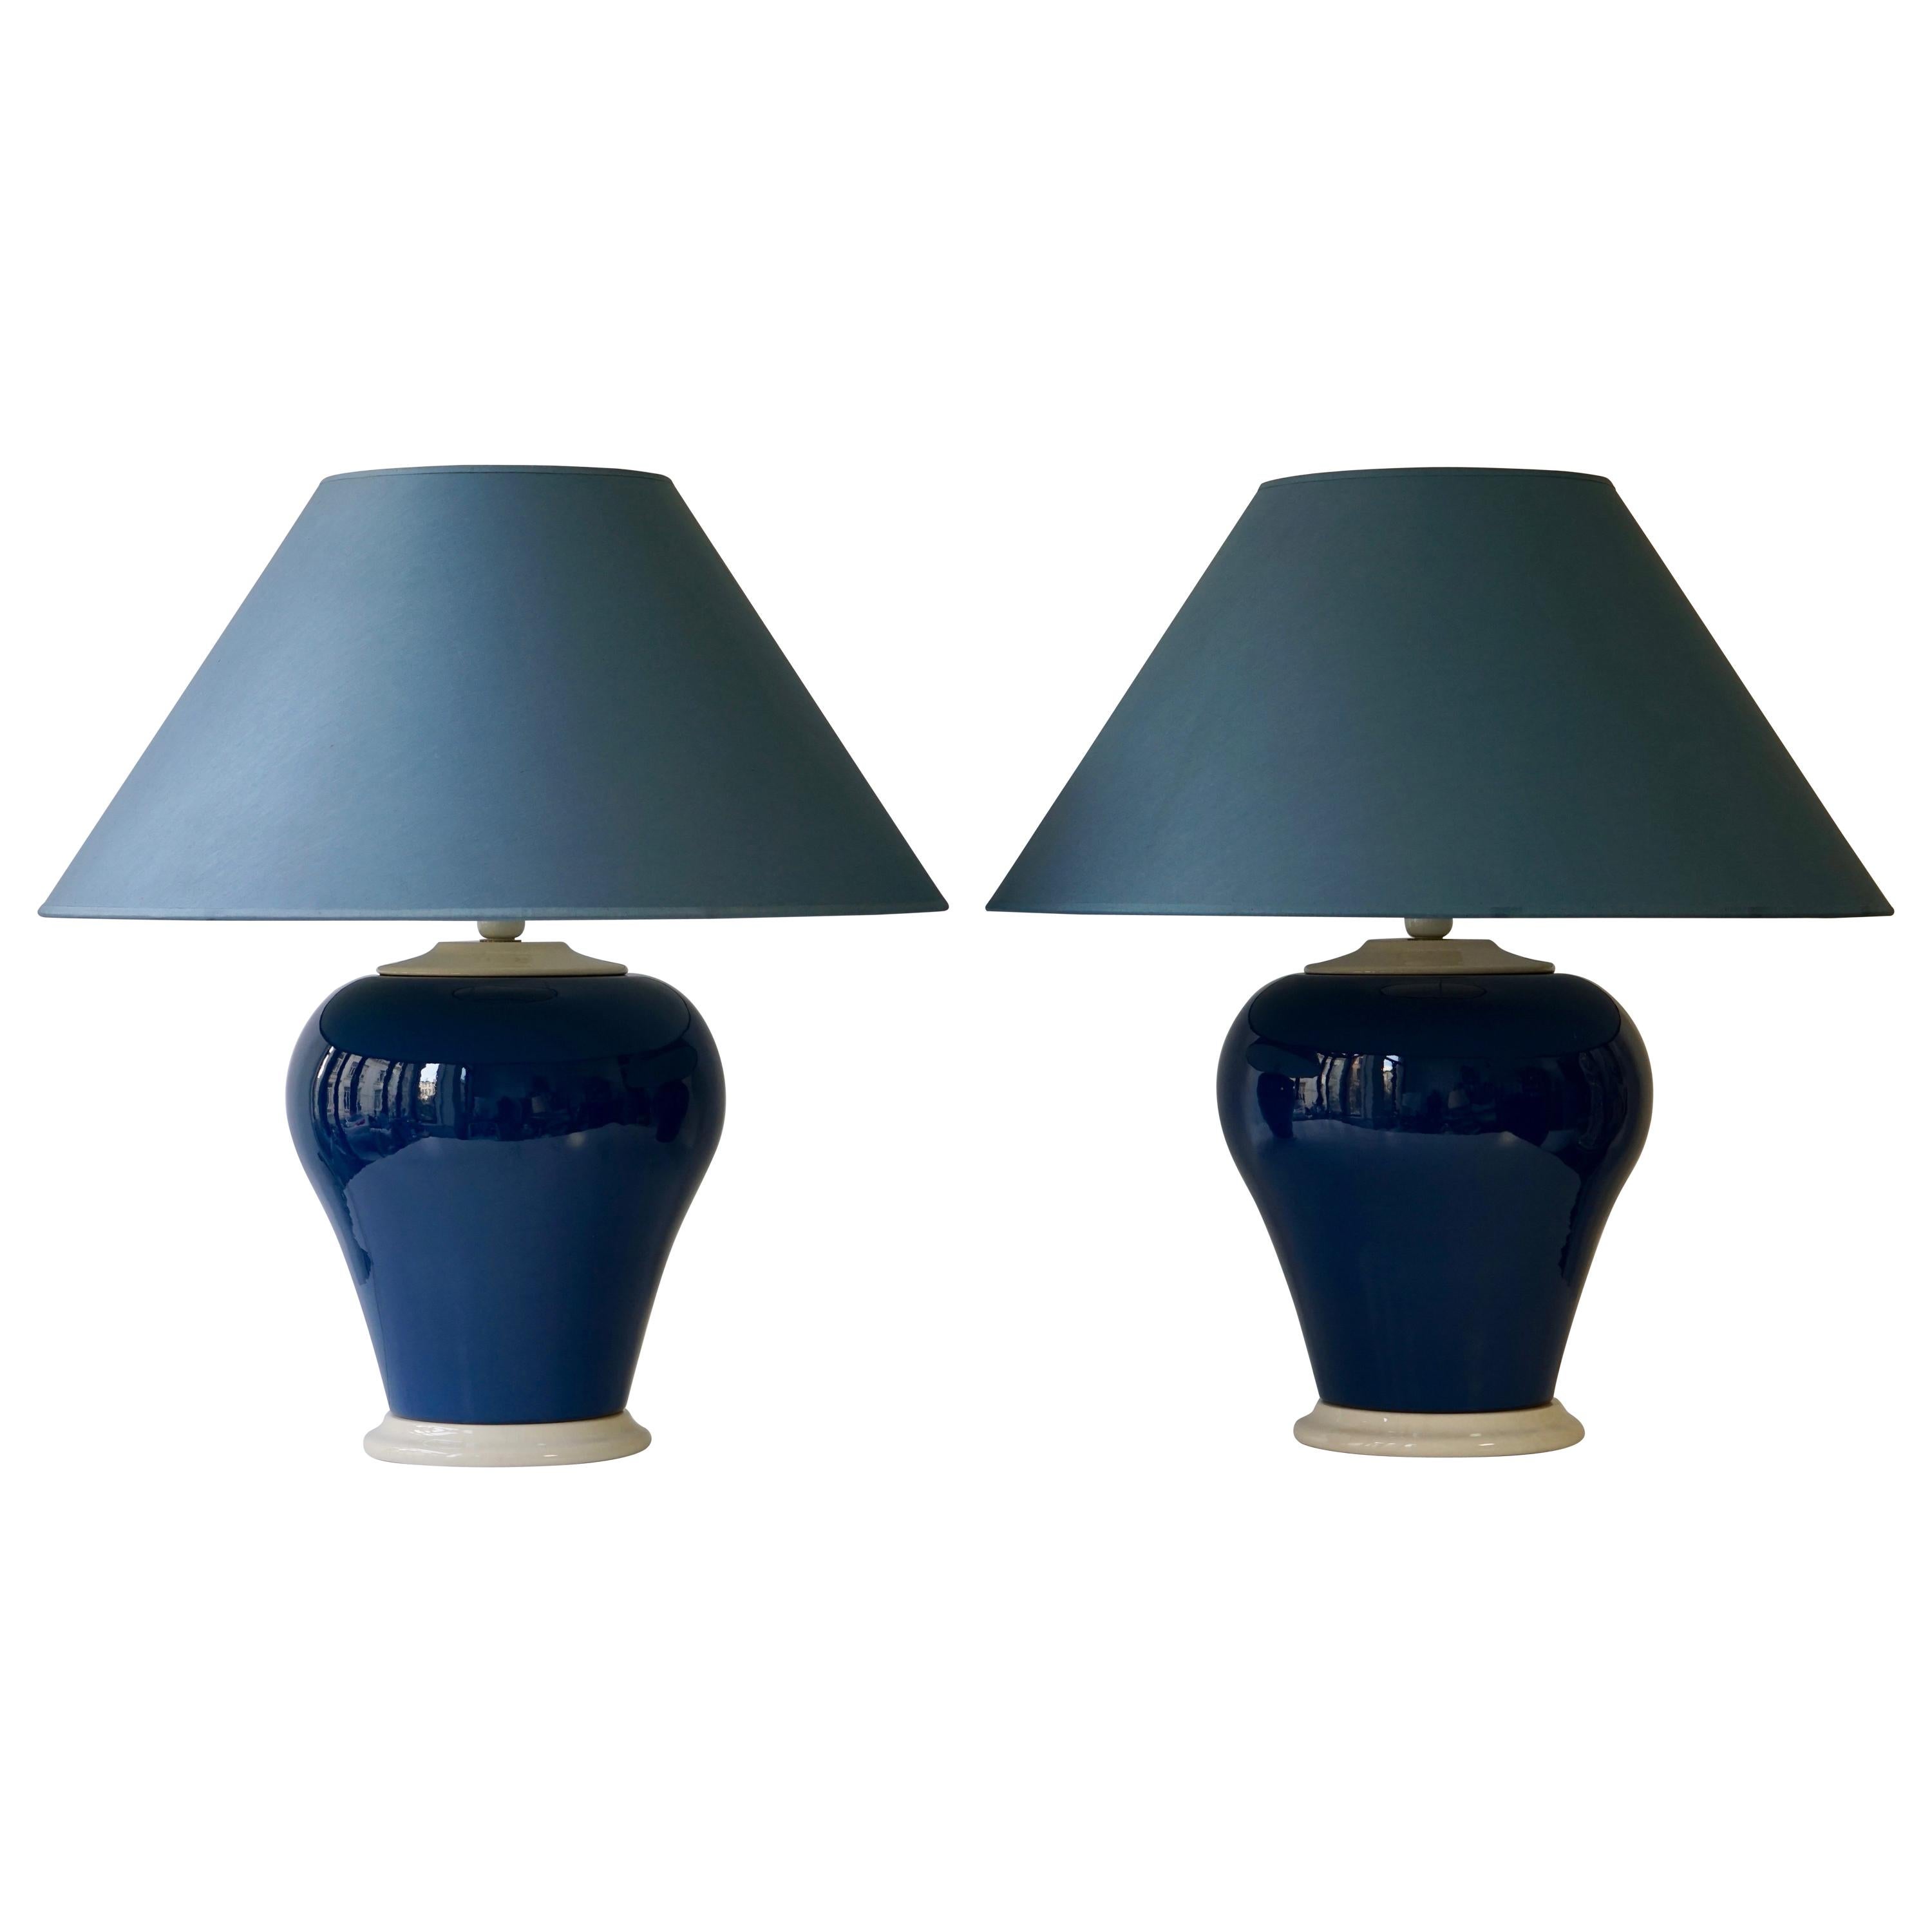 One of Two Ceramic Lamps in White and Blue